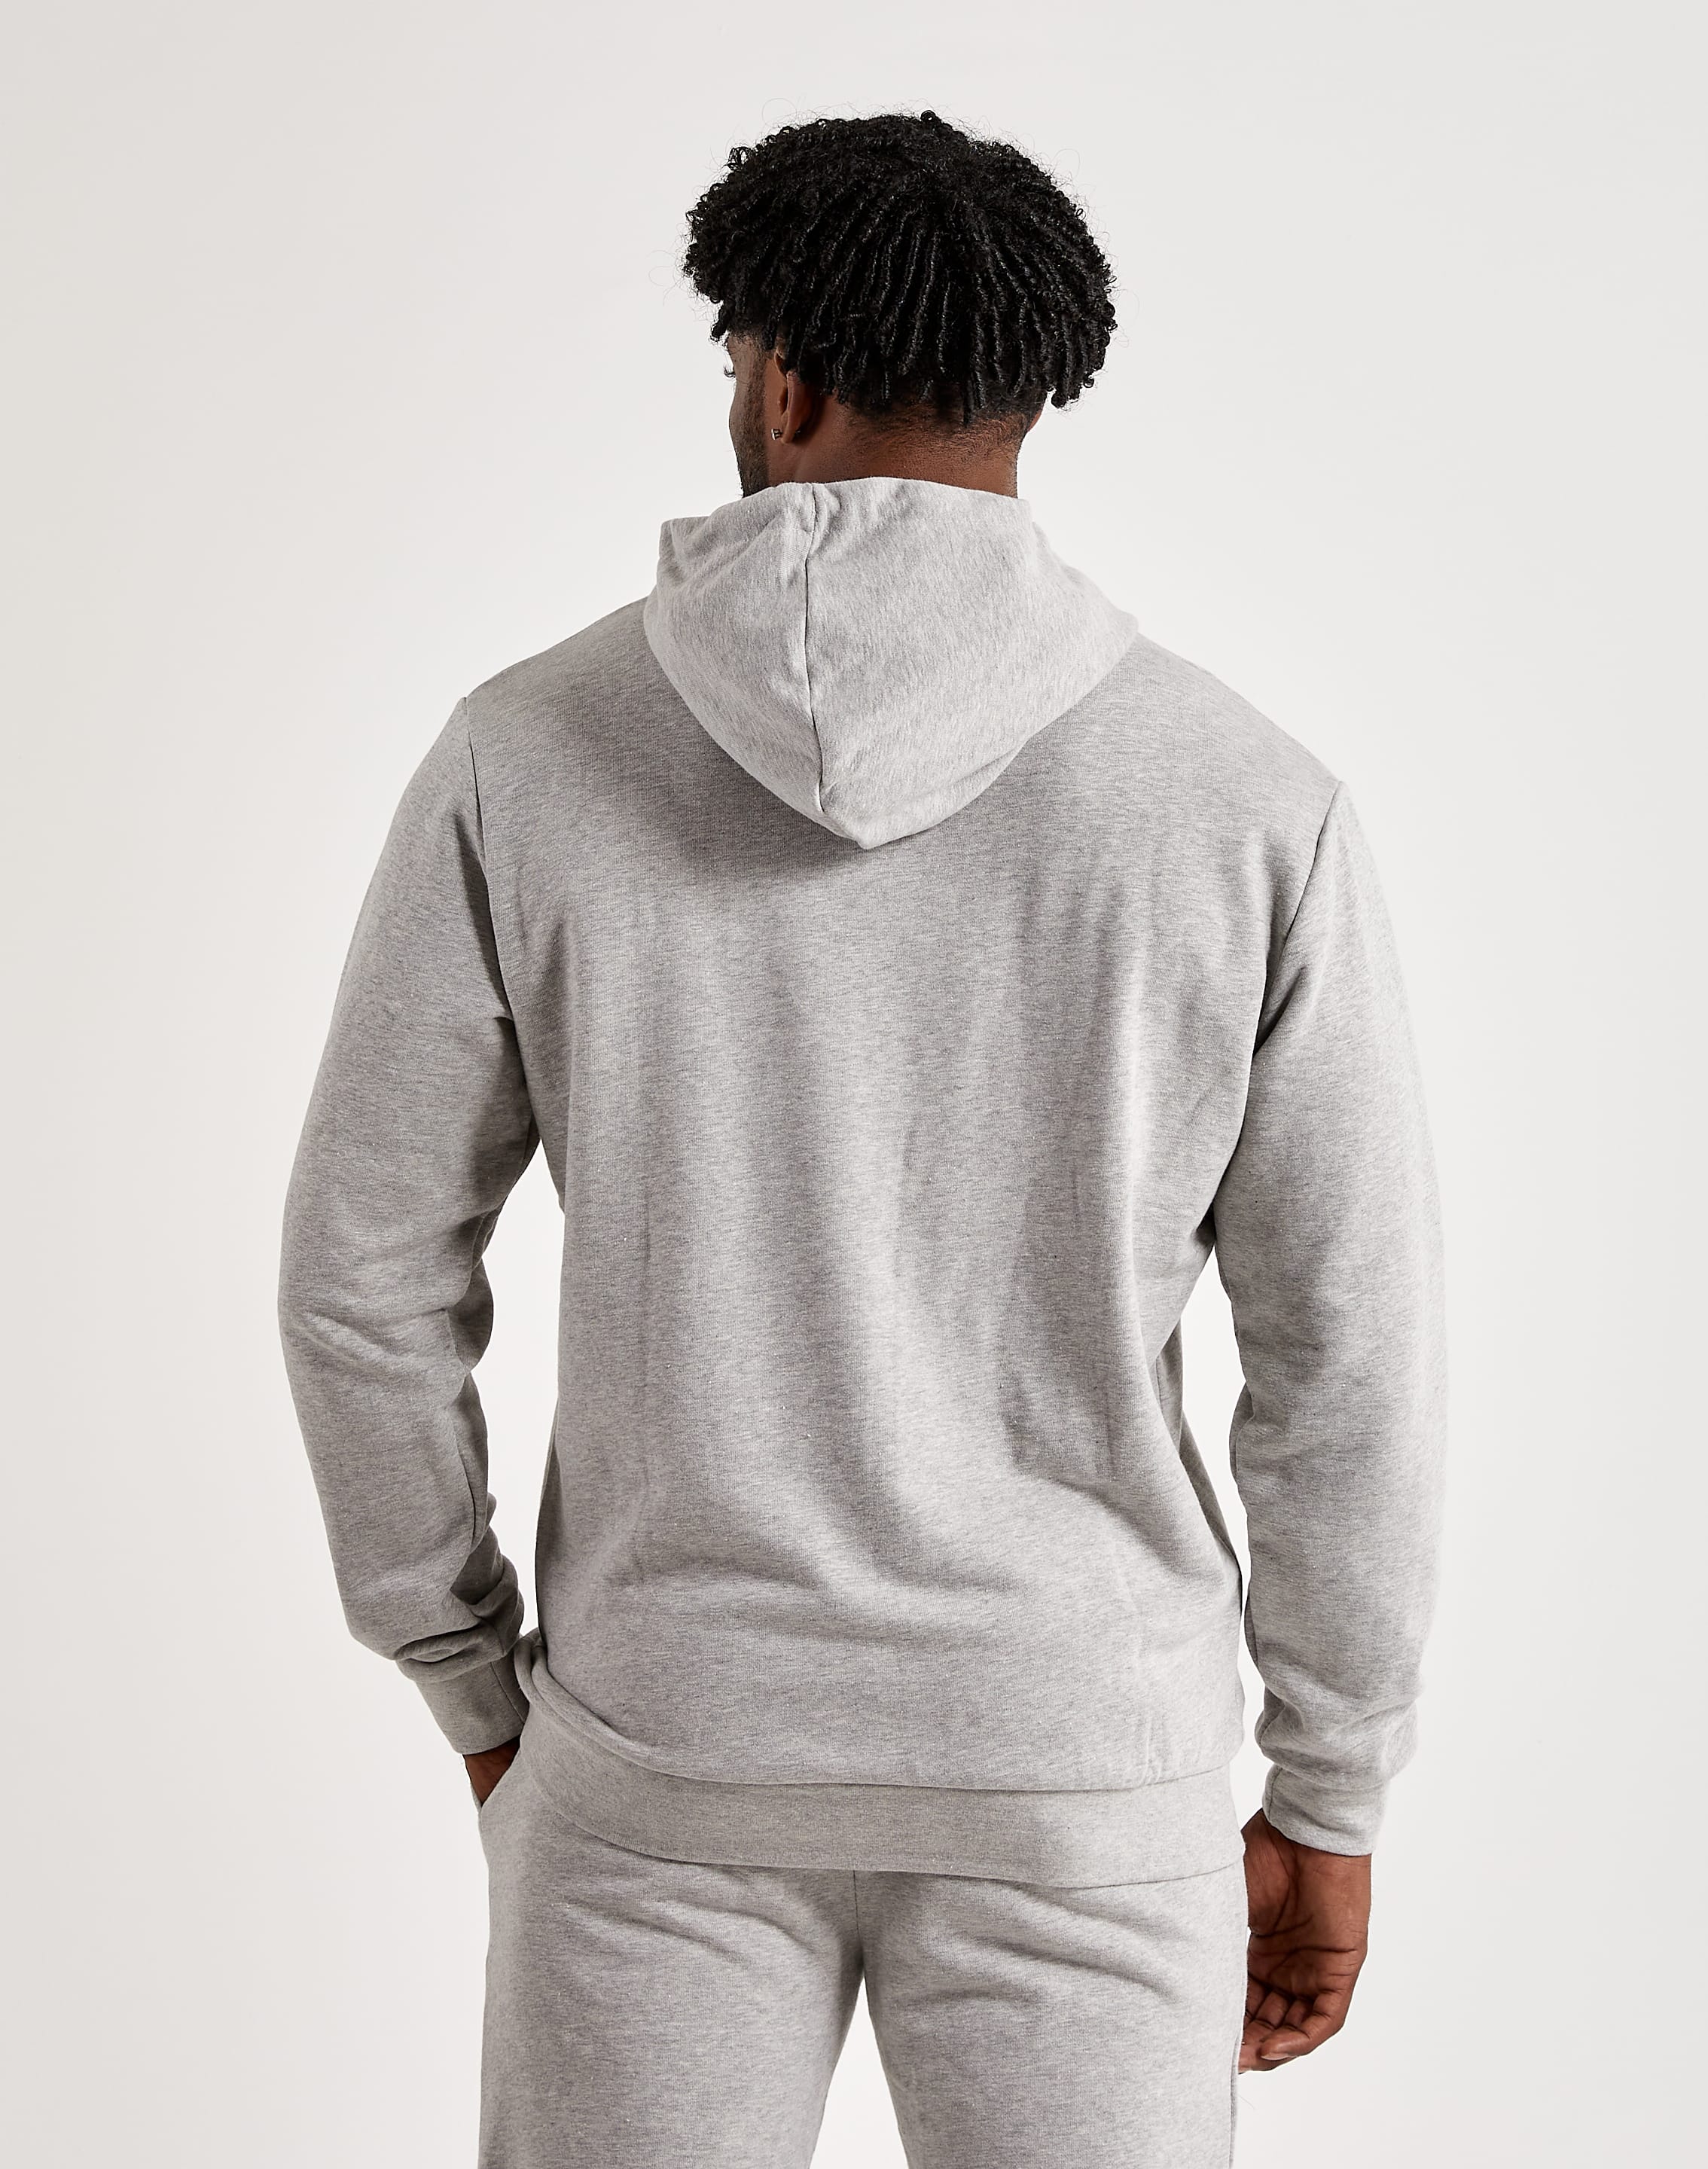 Kappa Authentic Malmo Pullover Hoodie